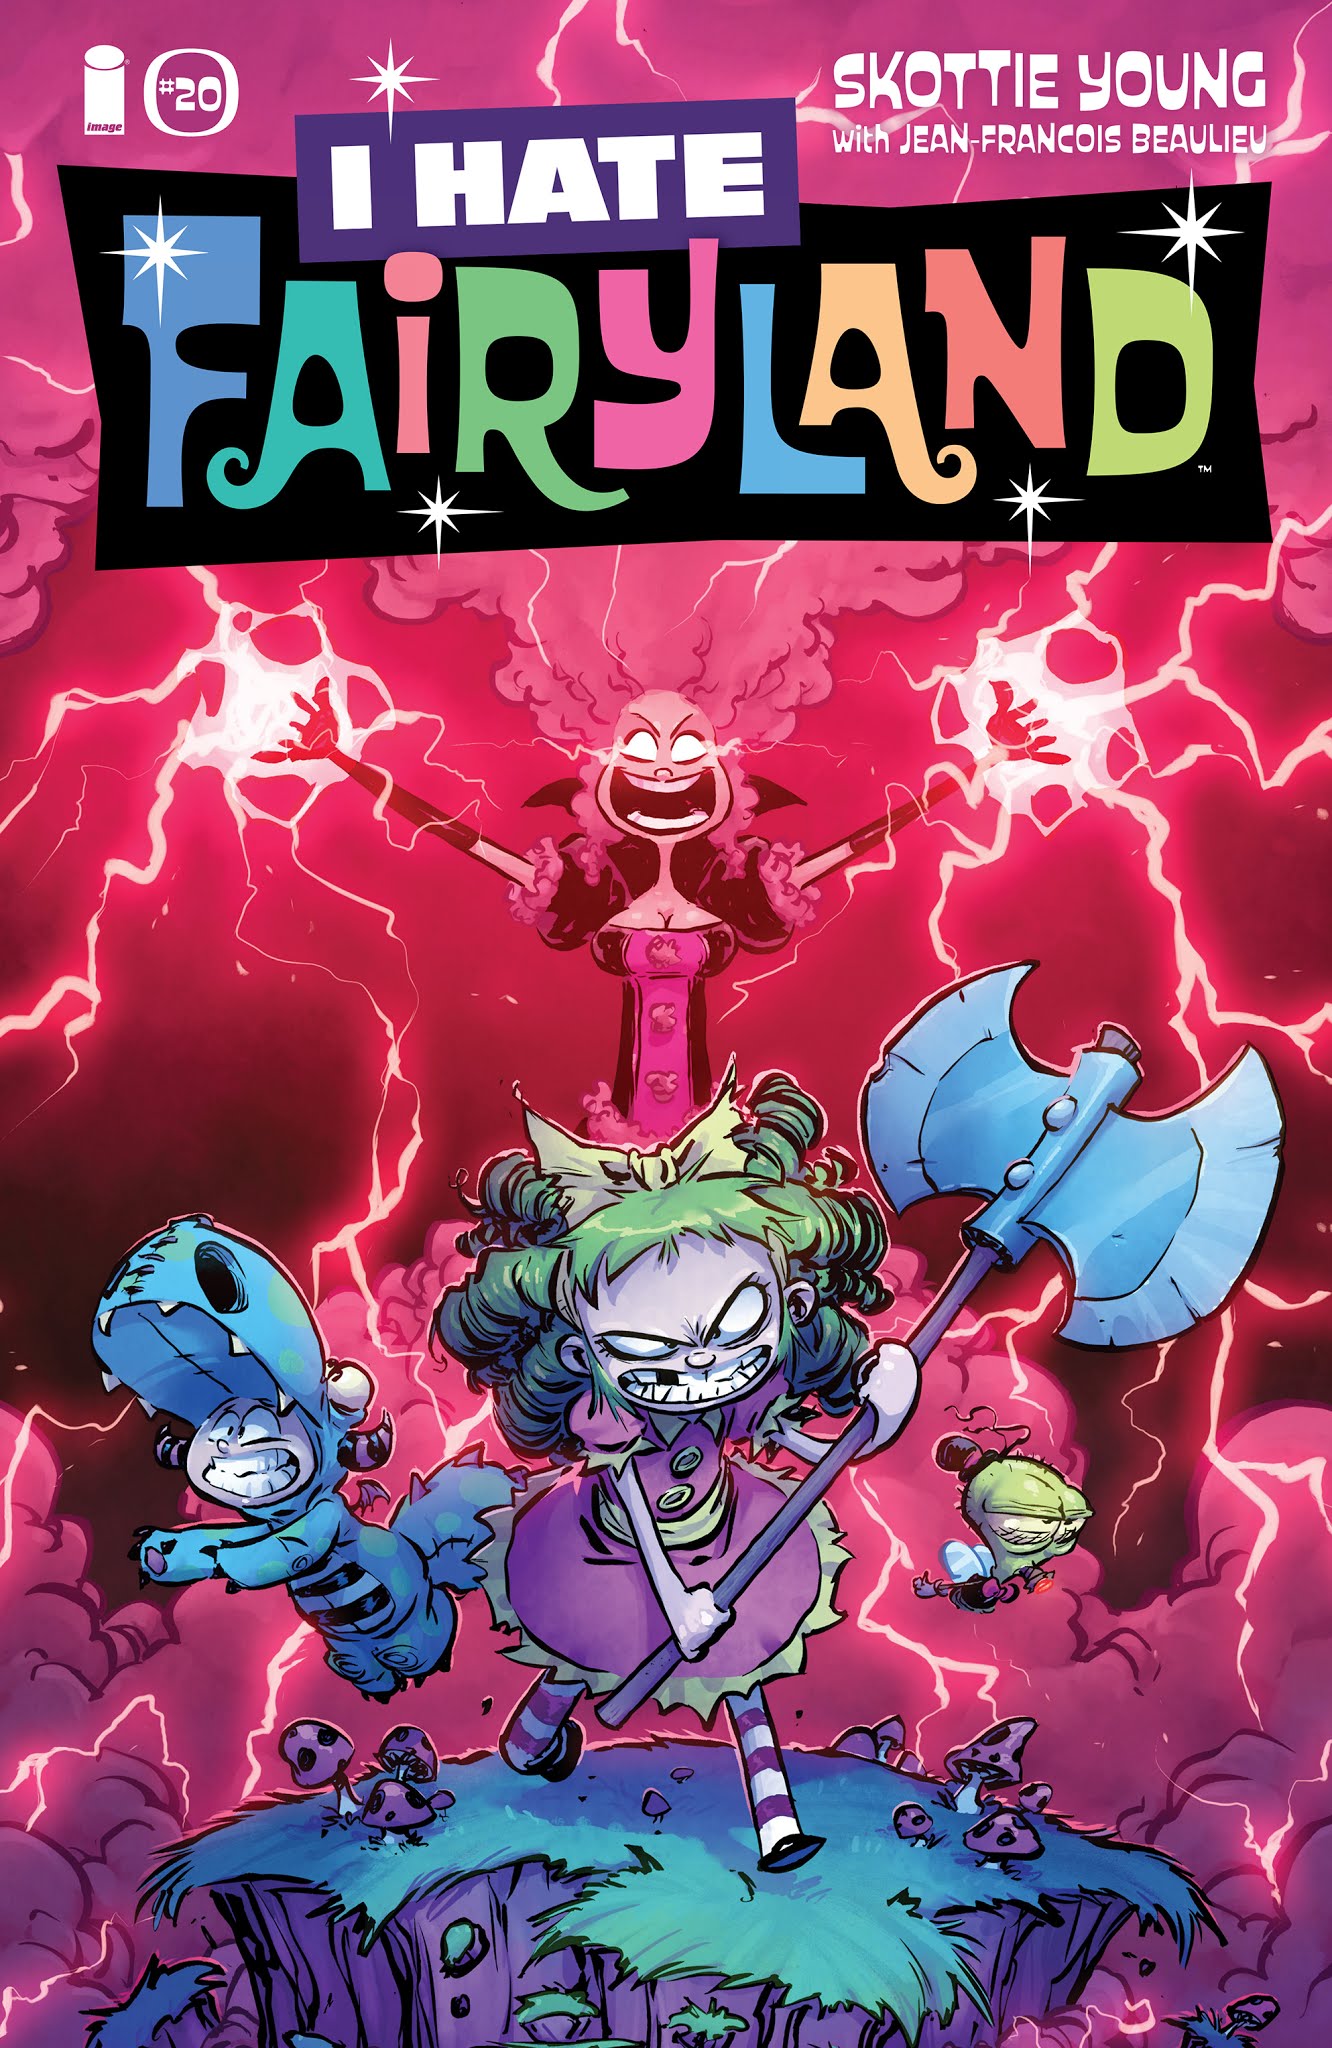 Read online I Hate Fairyland comic -  Issue #20 - 1